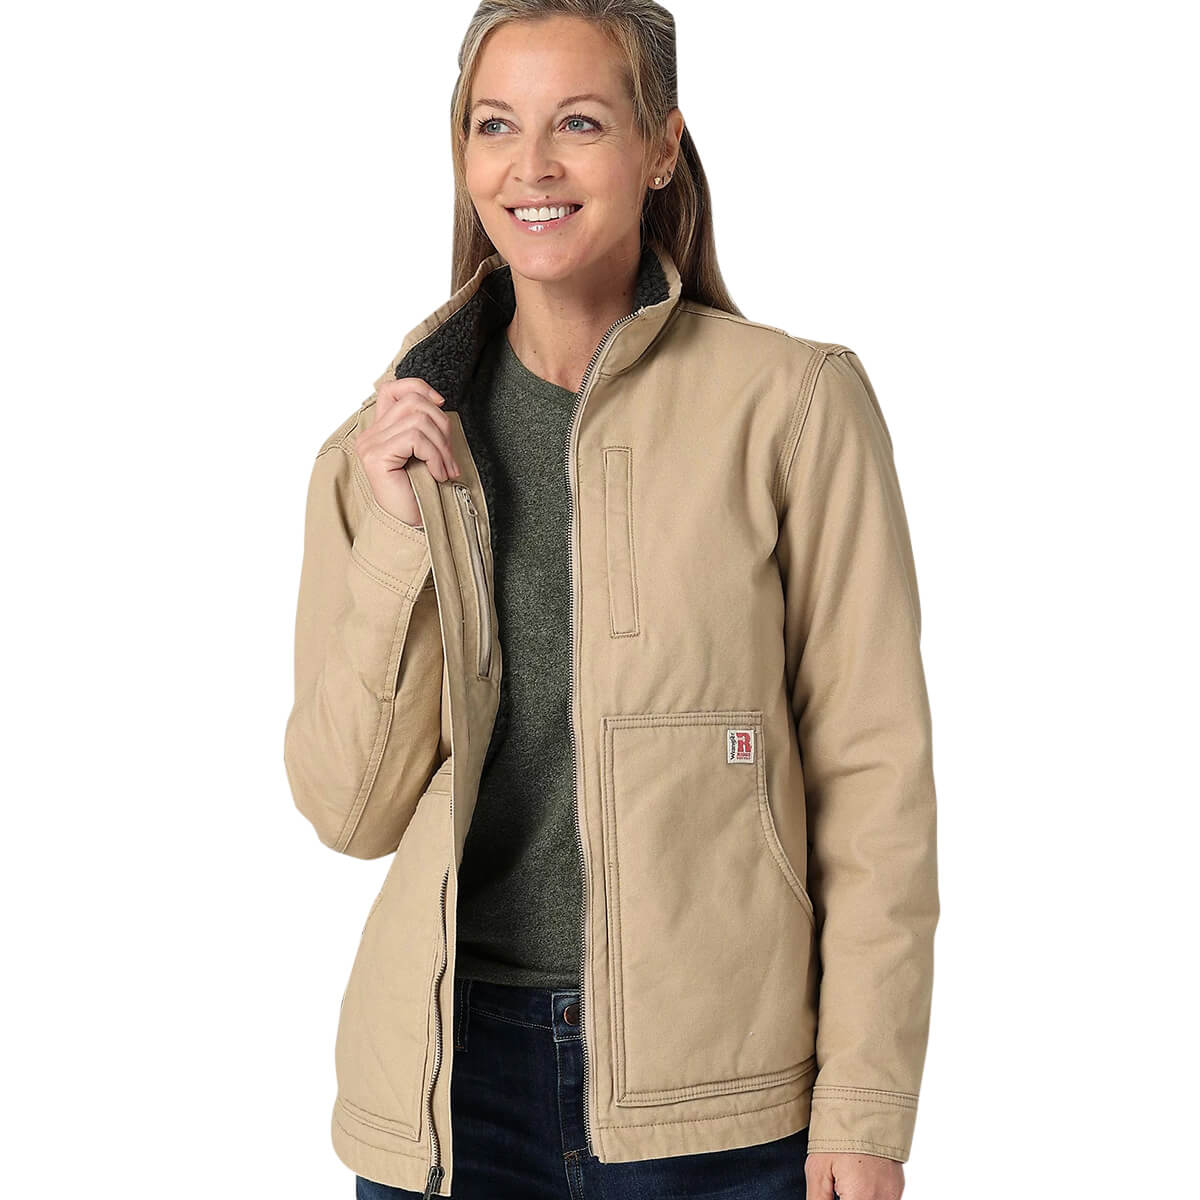 Women's Riggs Tough Layers Sherpa Lined Canvas Jacket - Golden Khaki